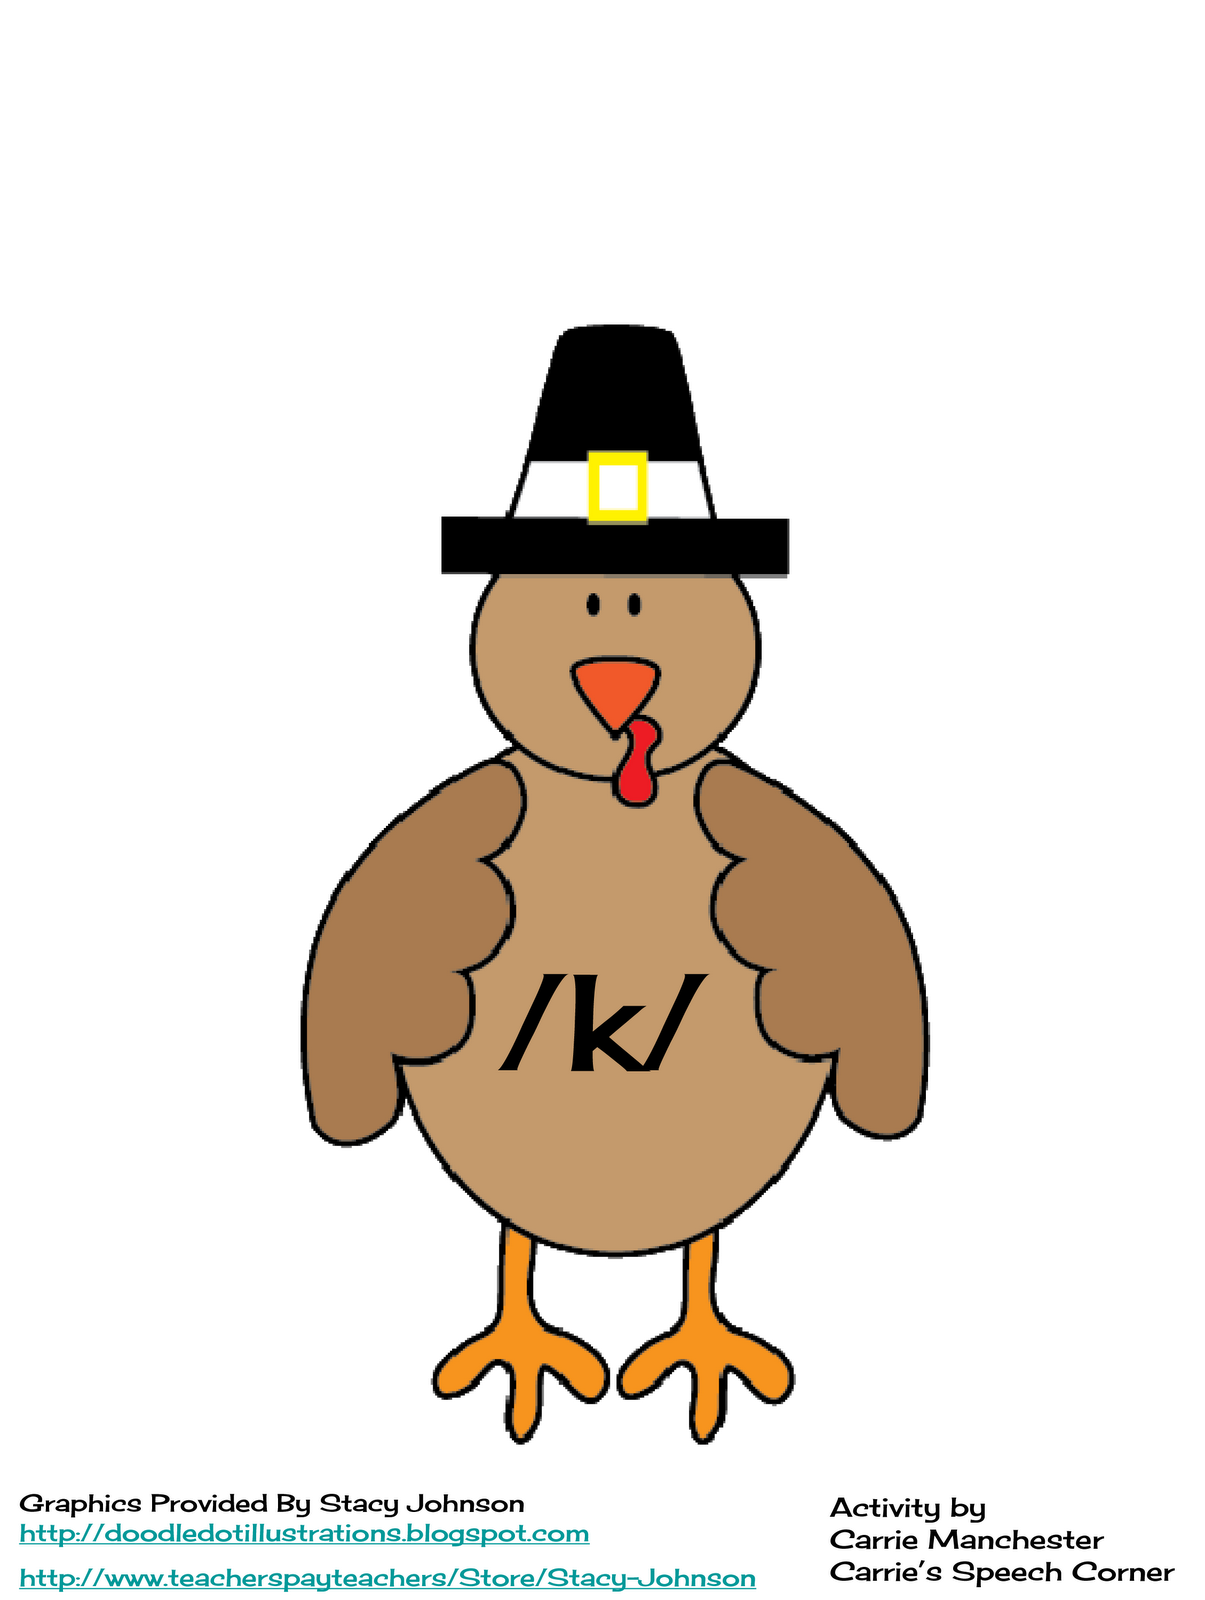 Clipart for a featherless turkey body for 3 yr old class 